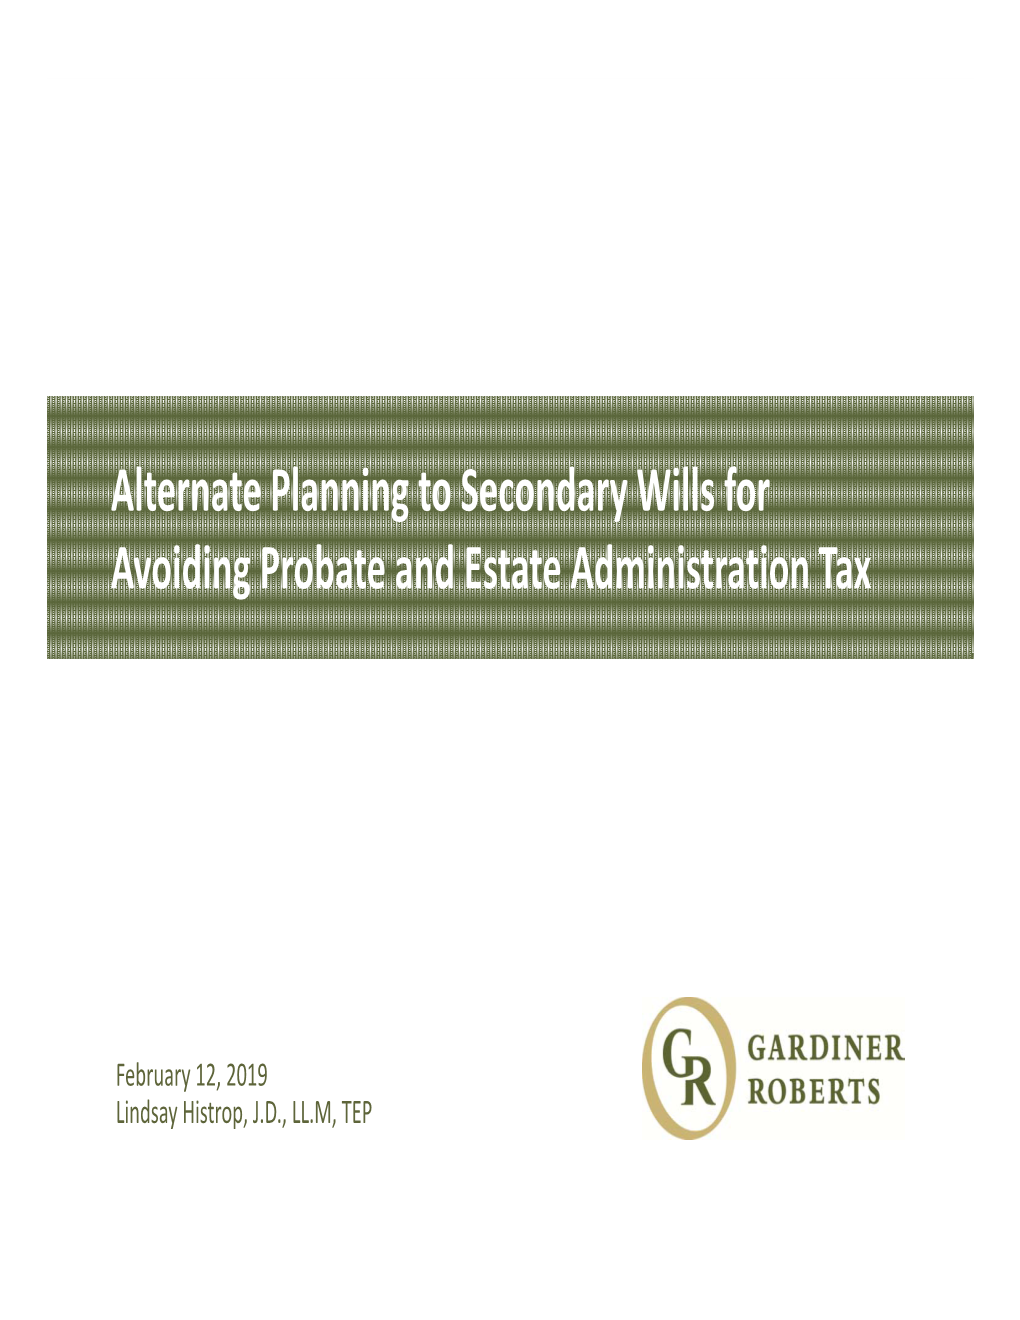 Alternate Planning to Secondary Wills for Avoiding Probate and Estate Administration Tax